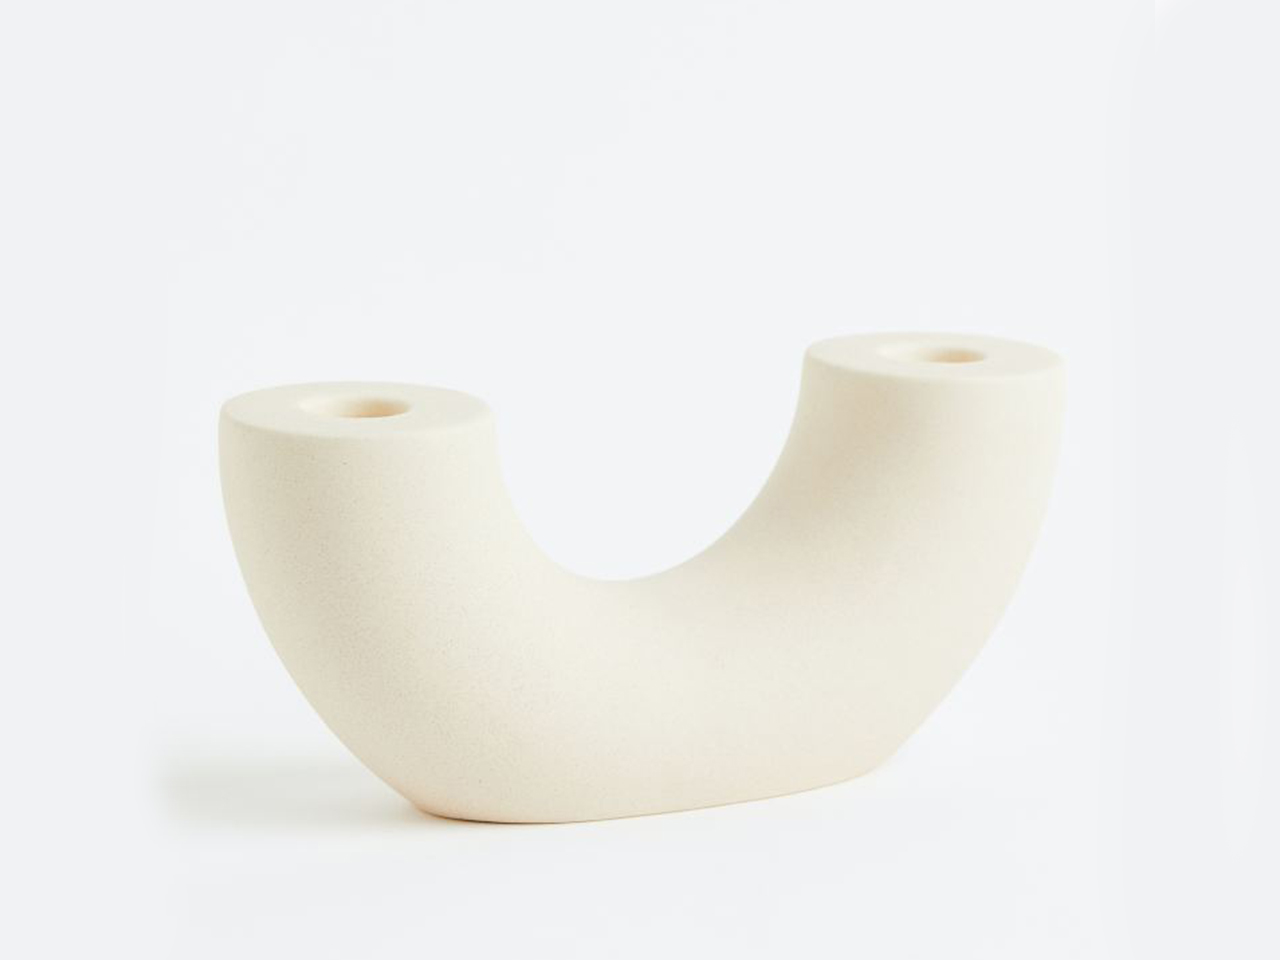 A white ceramic candle holder from H&M for summer outdoor entertaining.